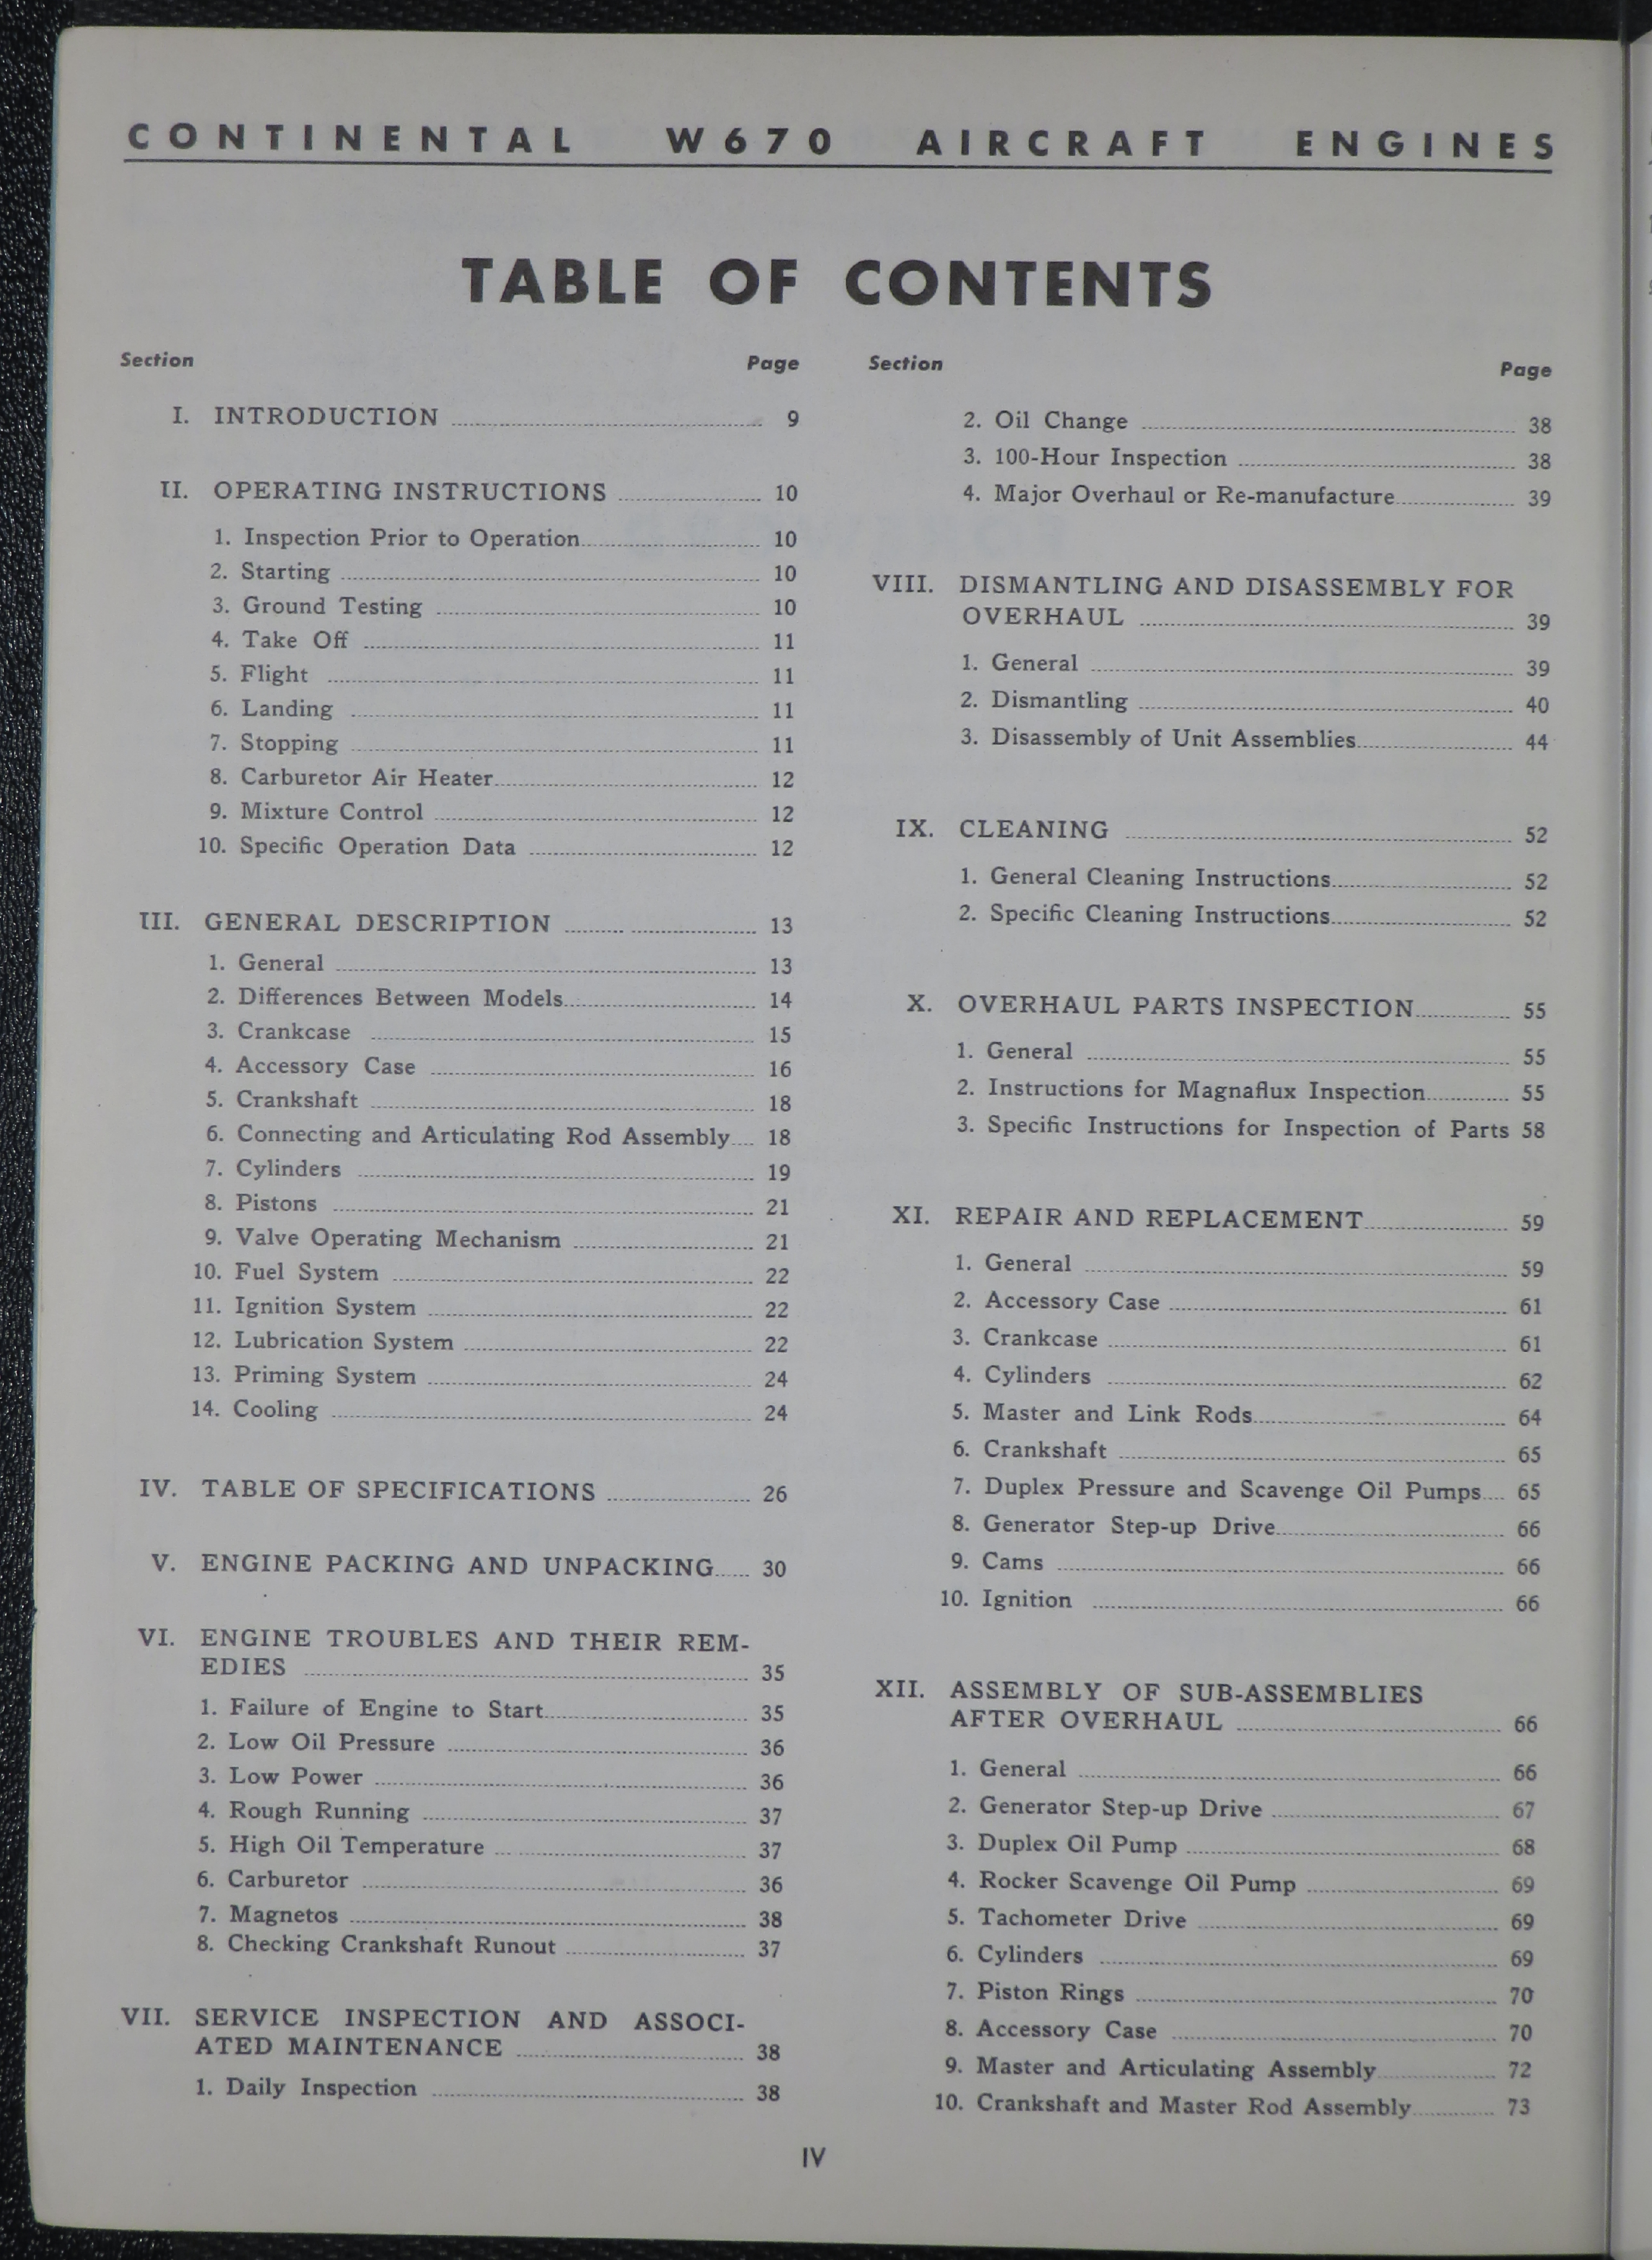 Sample page 6 from AirCorps Library document: Operation and Maintenance Instructions for W670 Series Engines